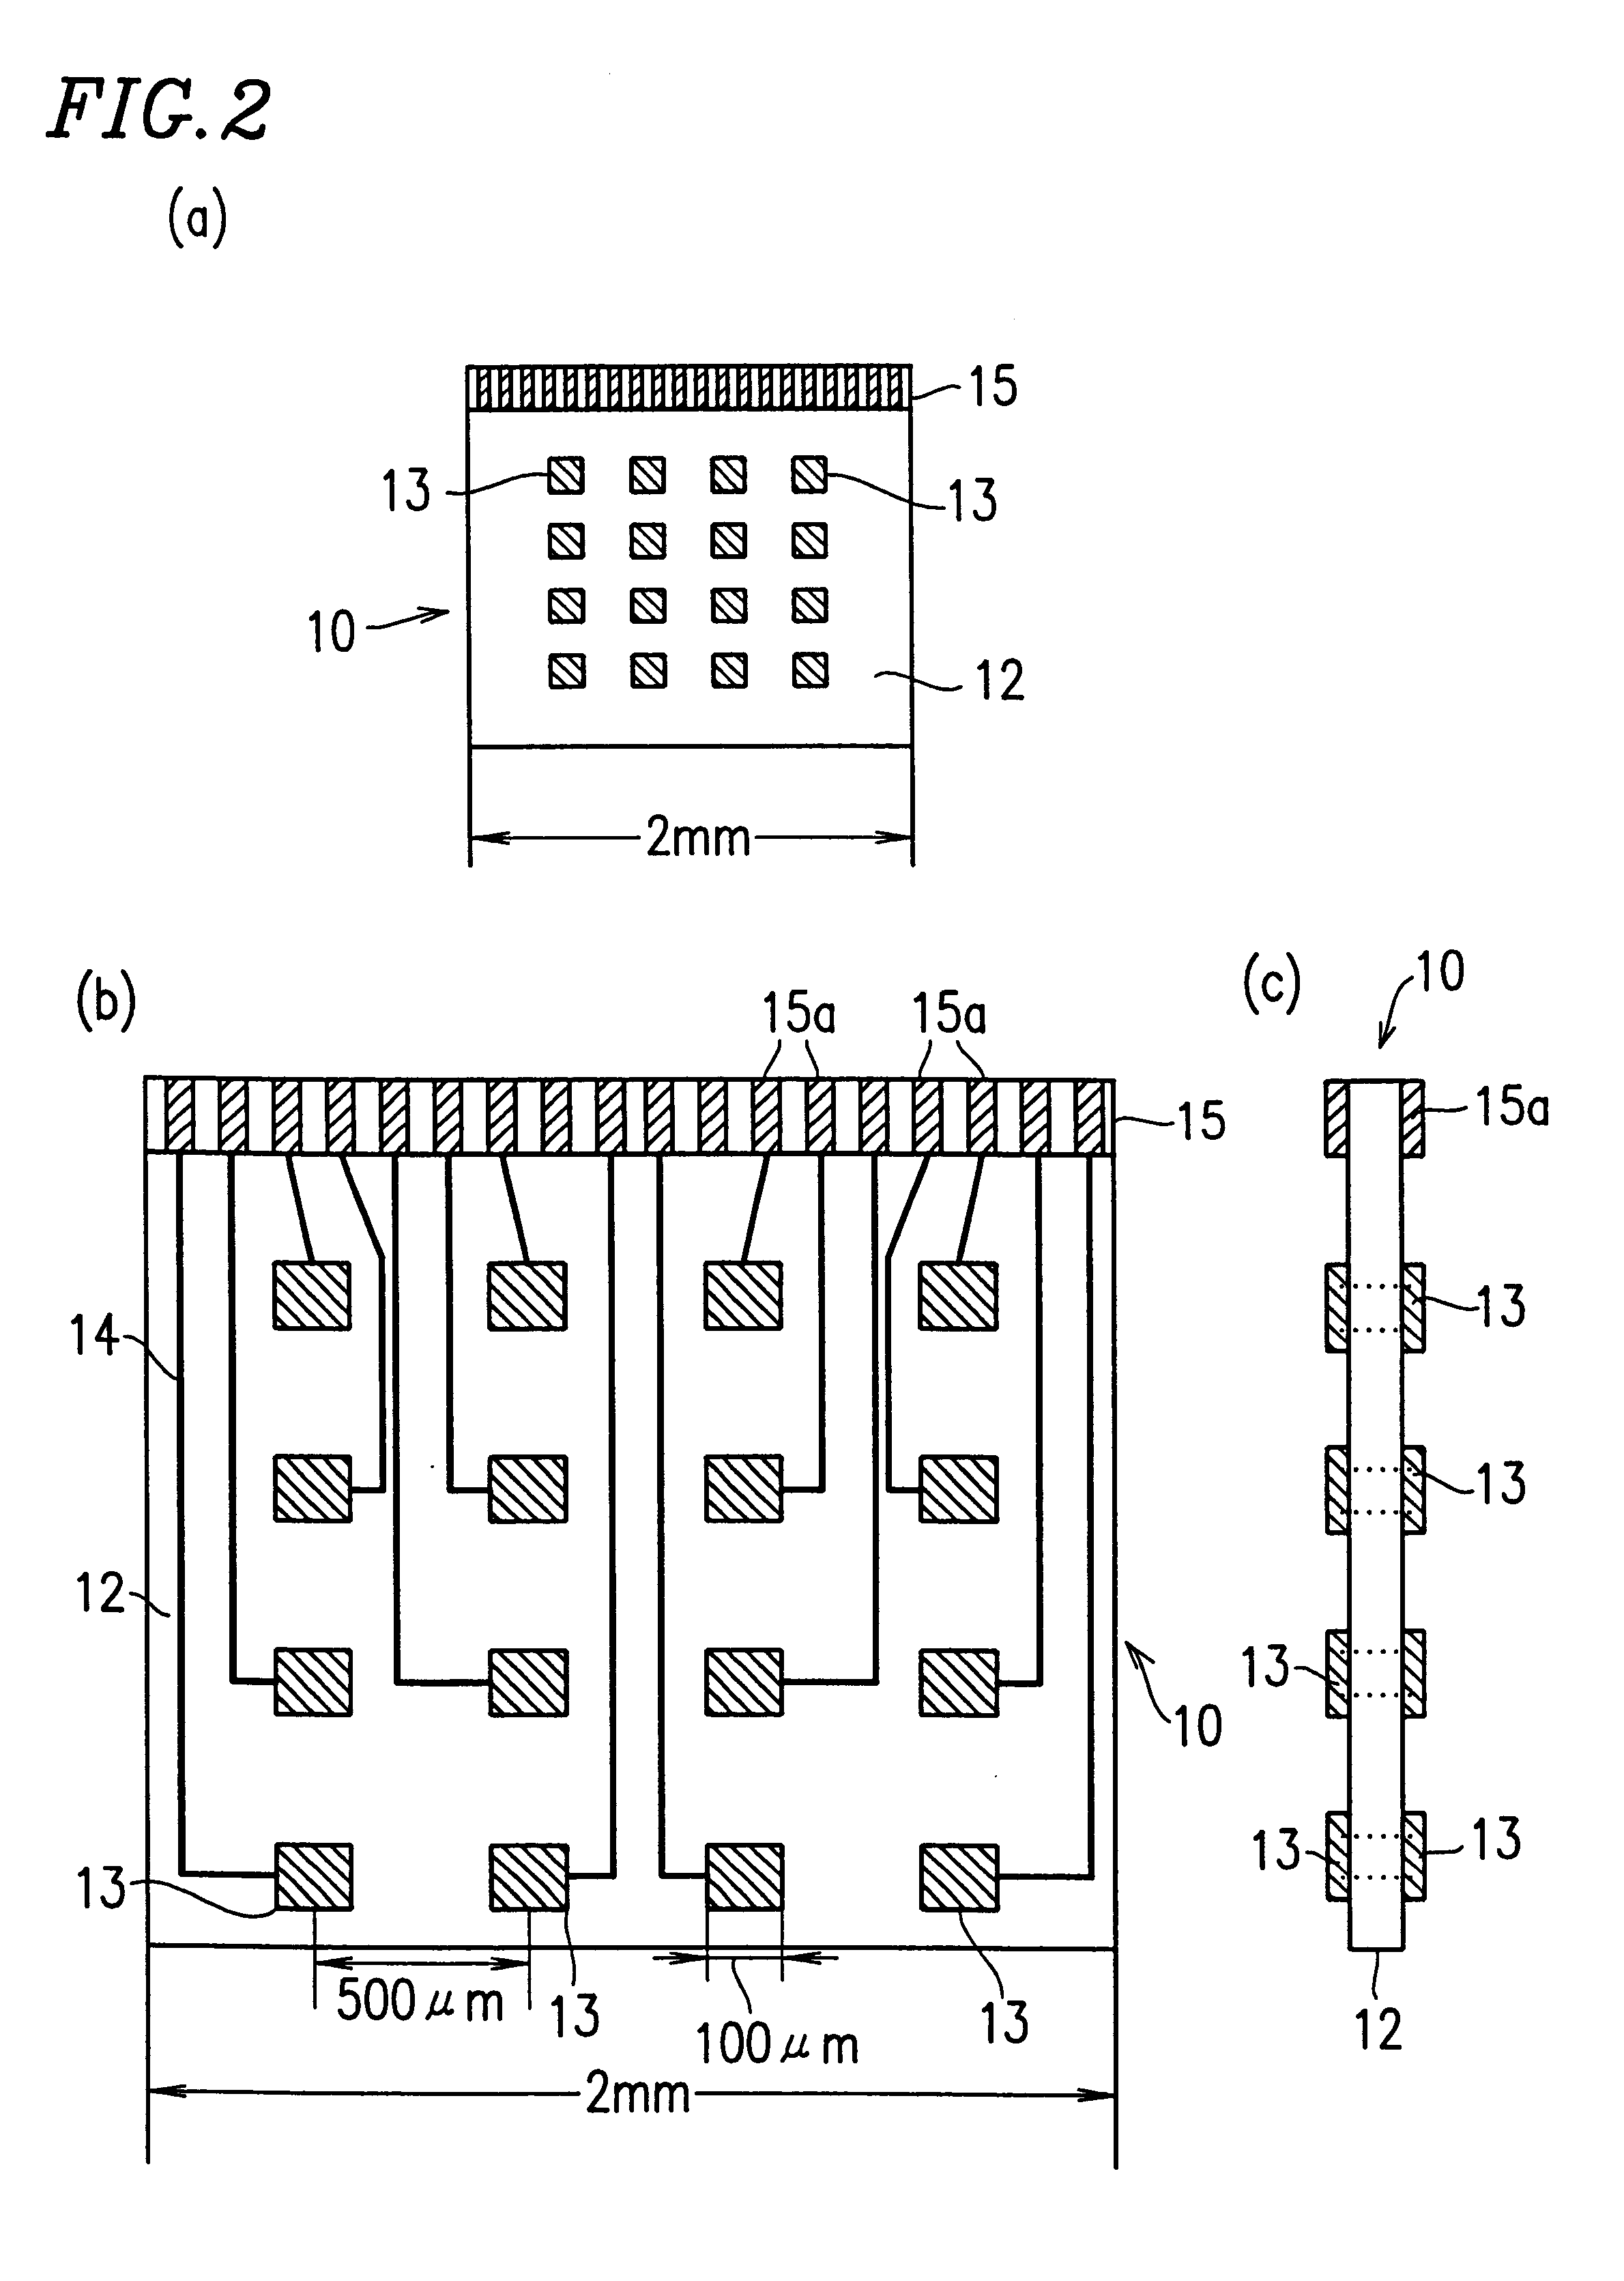 Apparatus and method for screening, olfactory mucosa stimulating compound found by the screening method, and therapeutic apparatus and electrode section for measurement